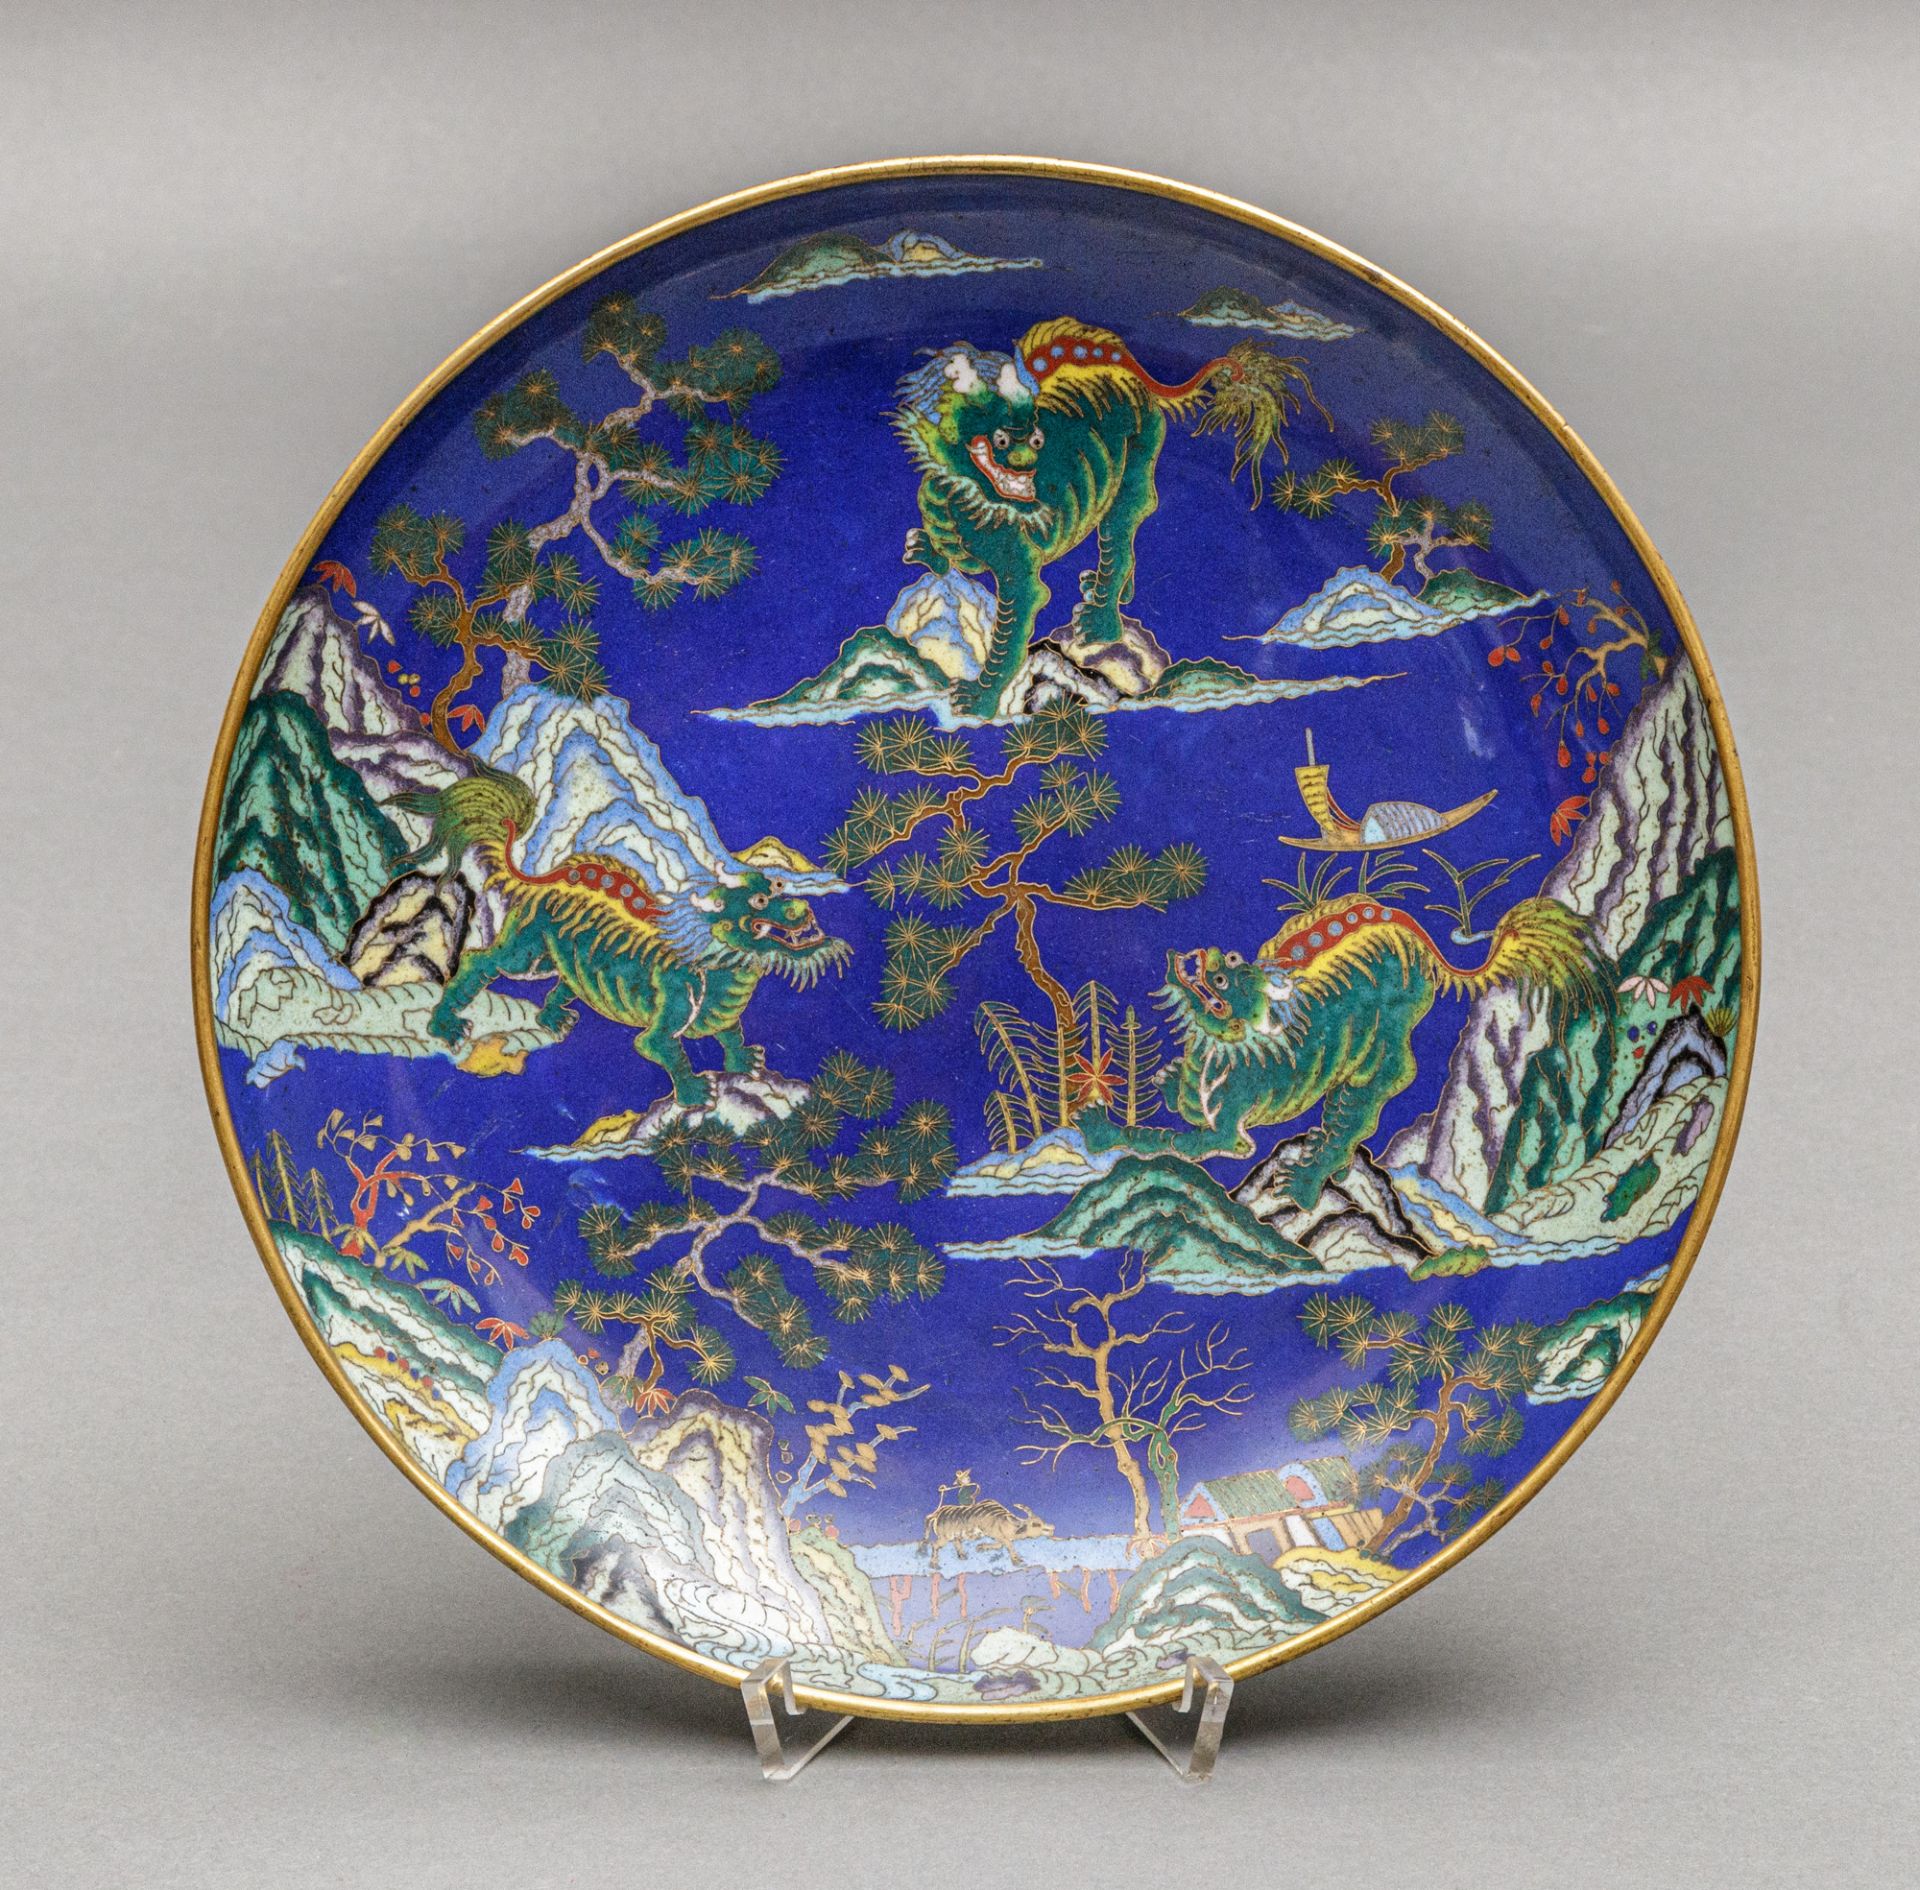 Paar Cloisonné Teller, China, wohl Qing Dynastie, 1644-1911